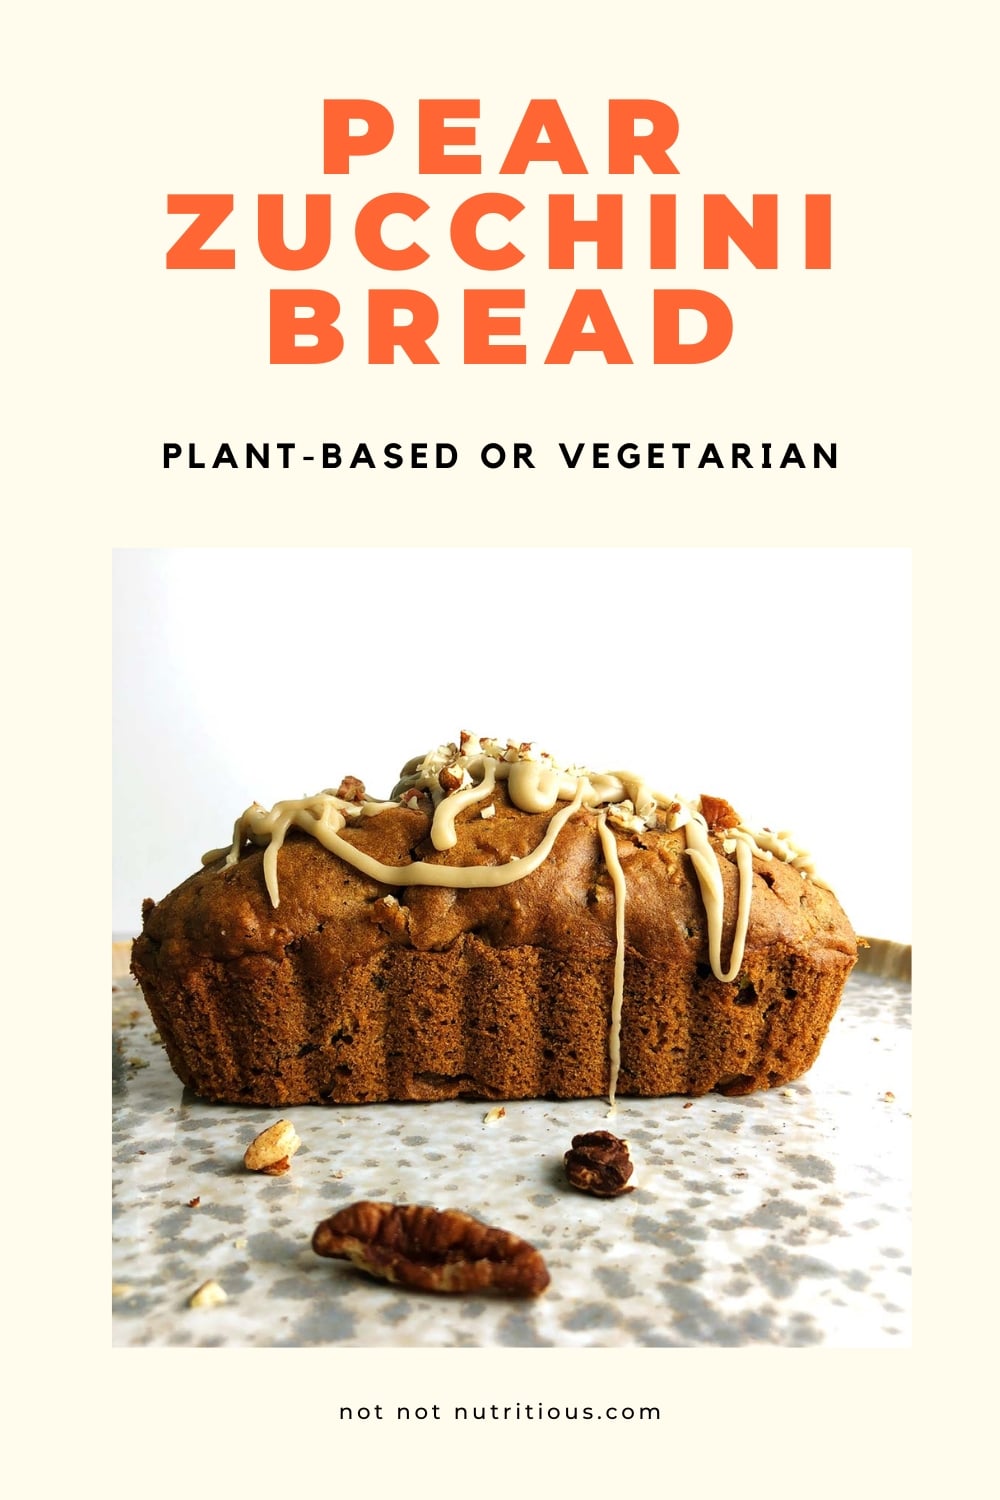 Pin for Pear Zucchini Bread, plant-based or vegetarian